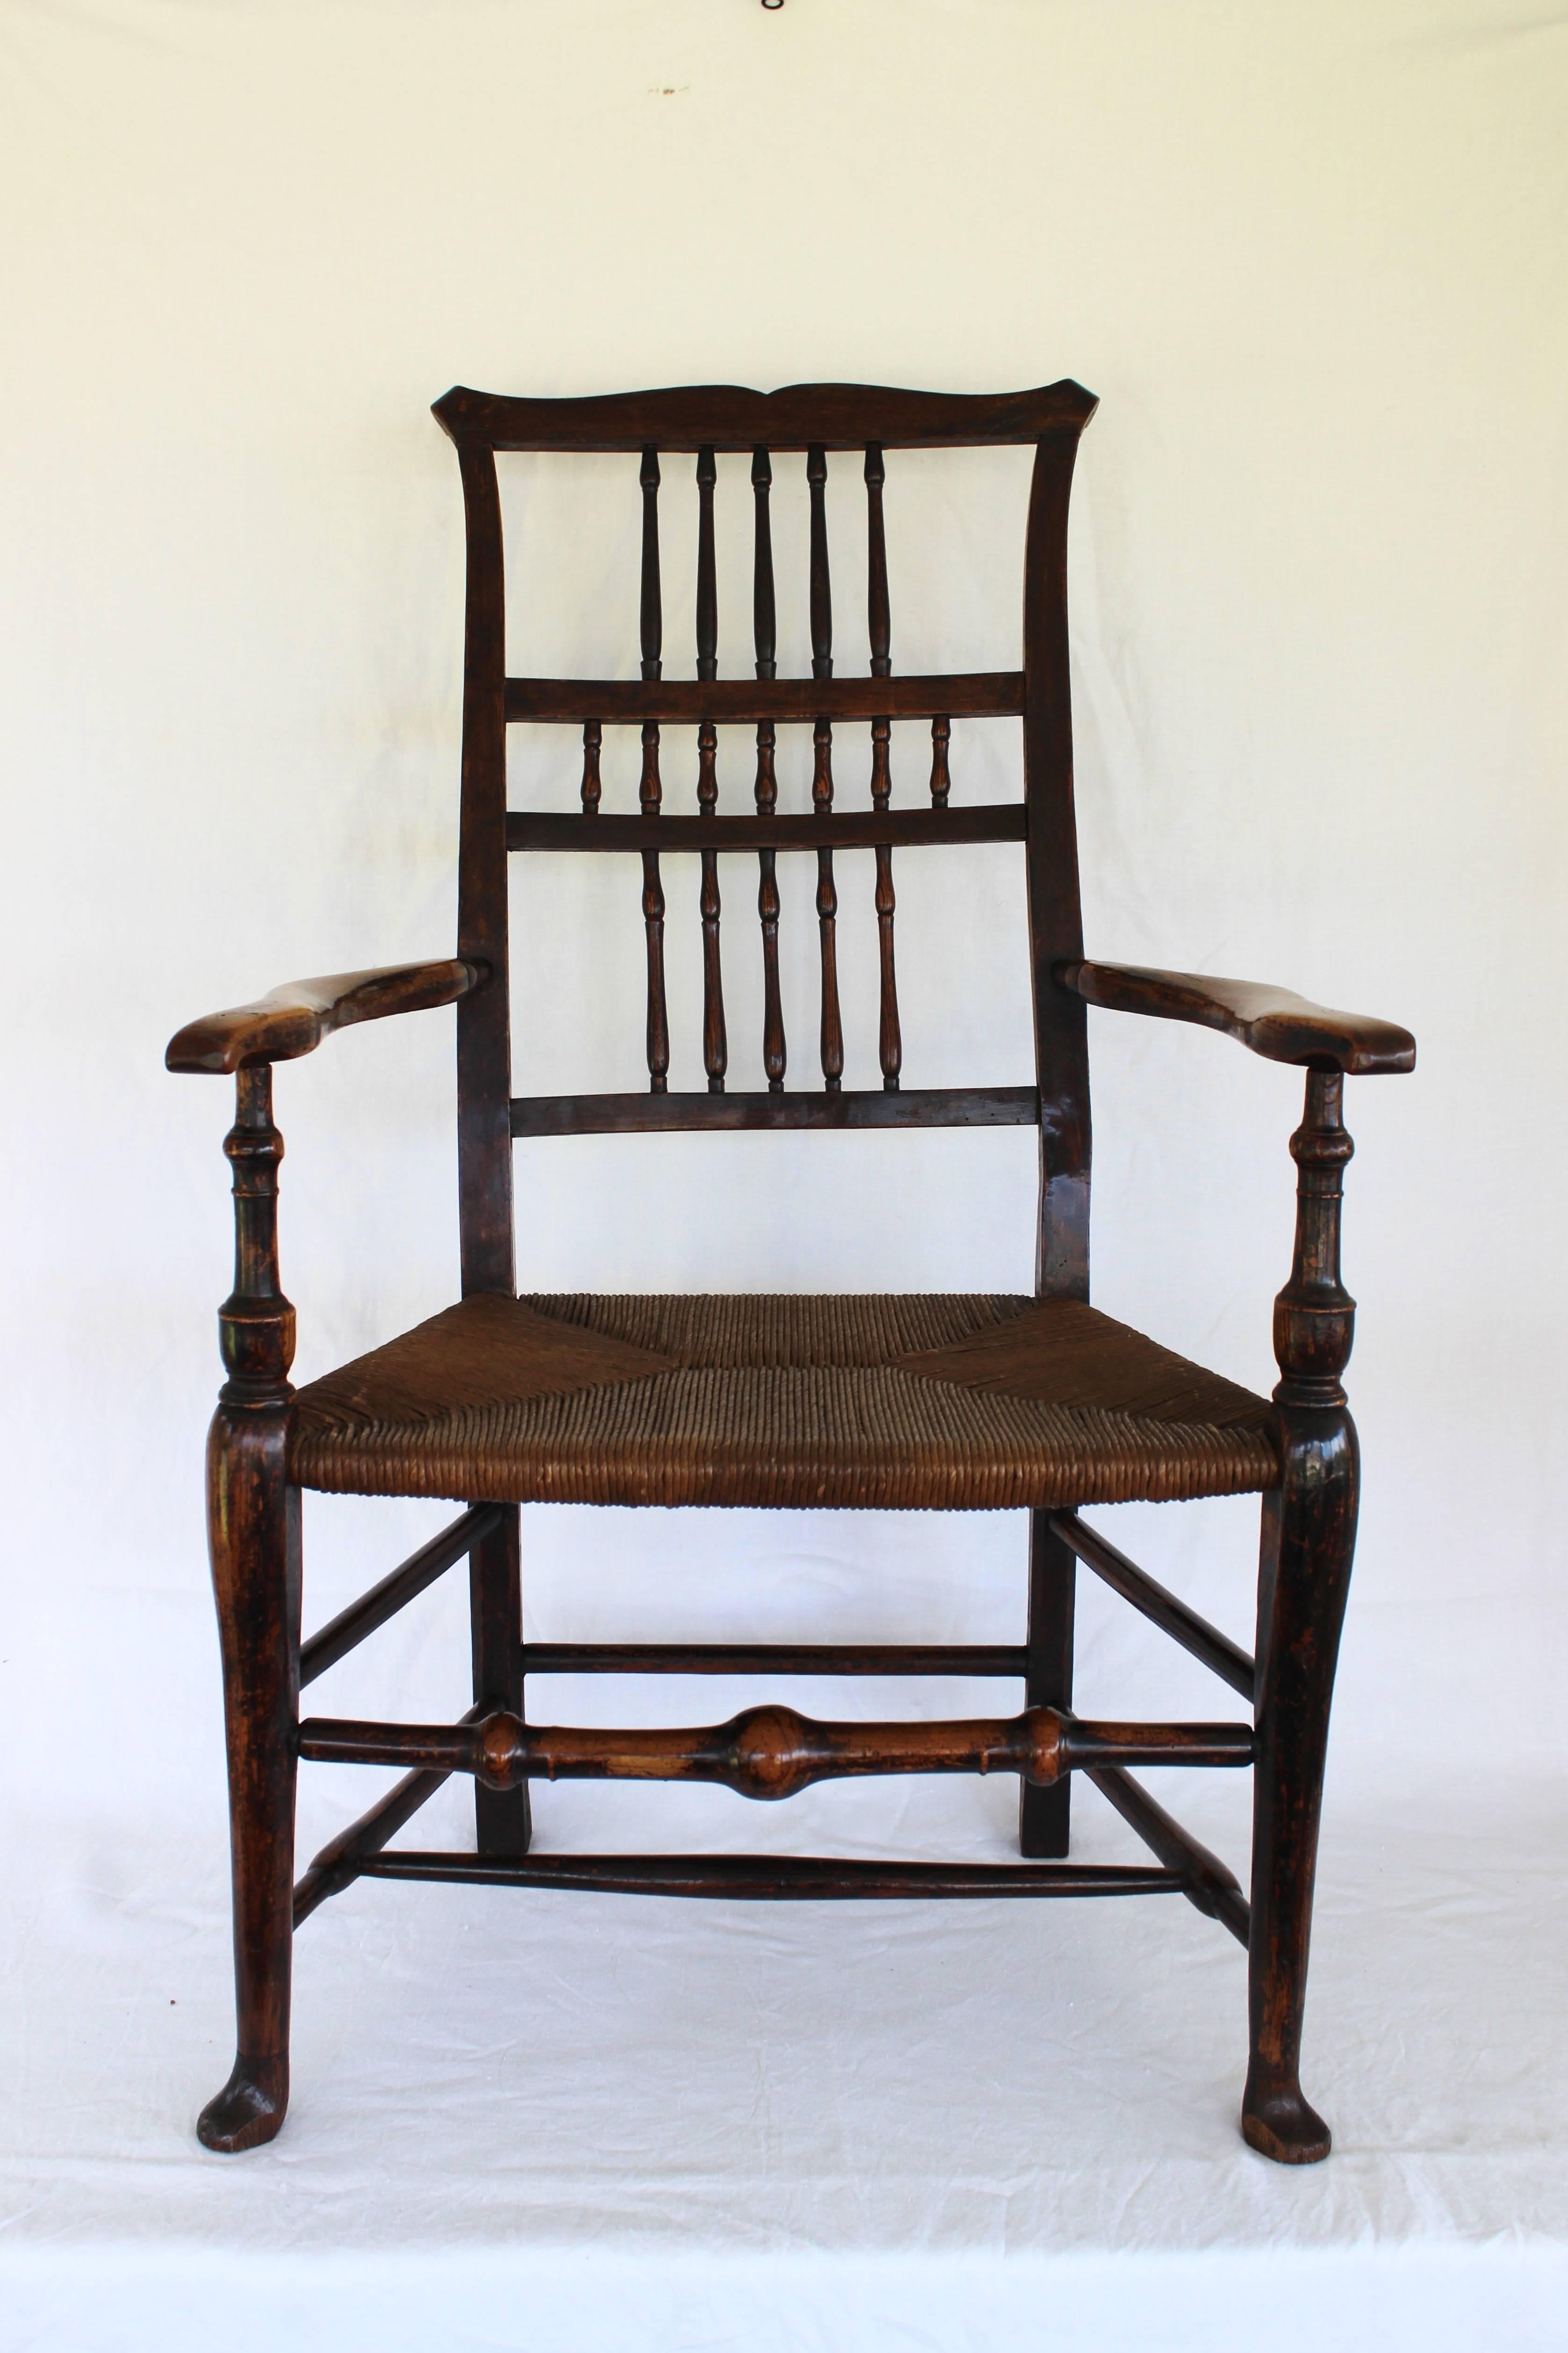 18th century English spindle back armchair with rush seat.